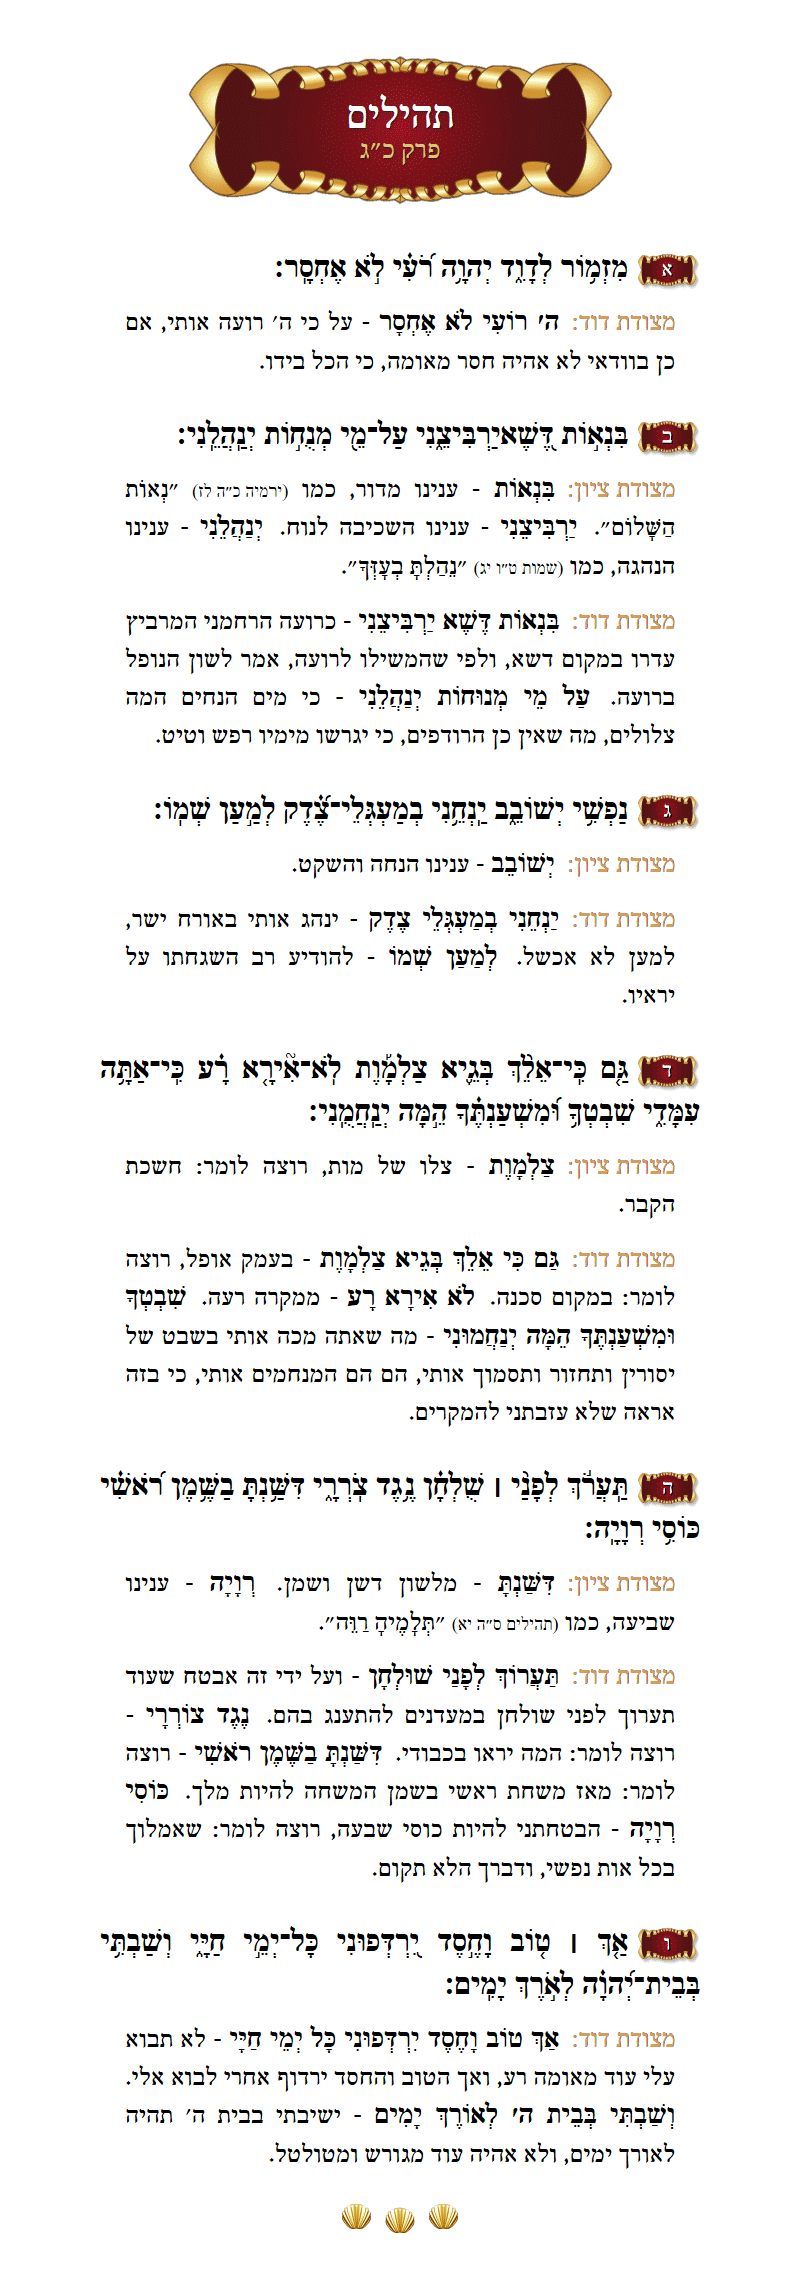 Sefer Tehillim Chapter 32 with commentary